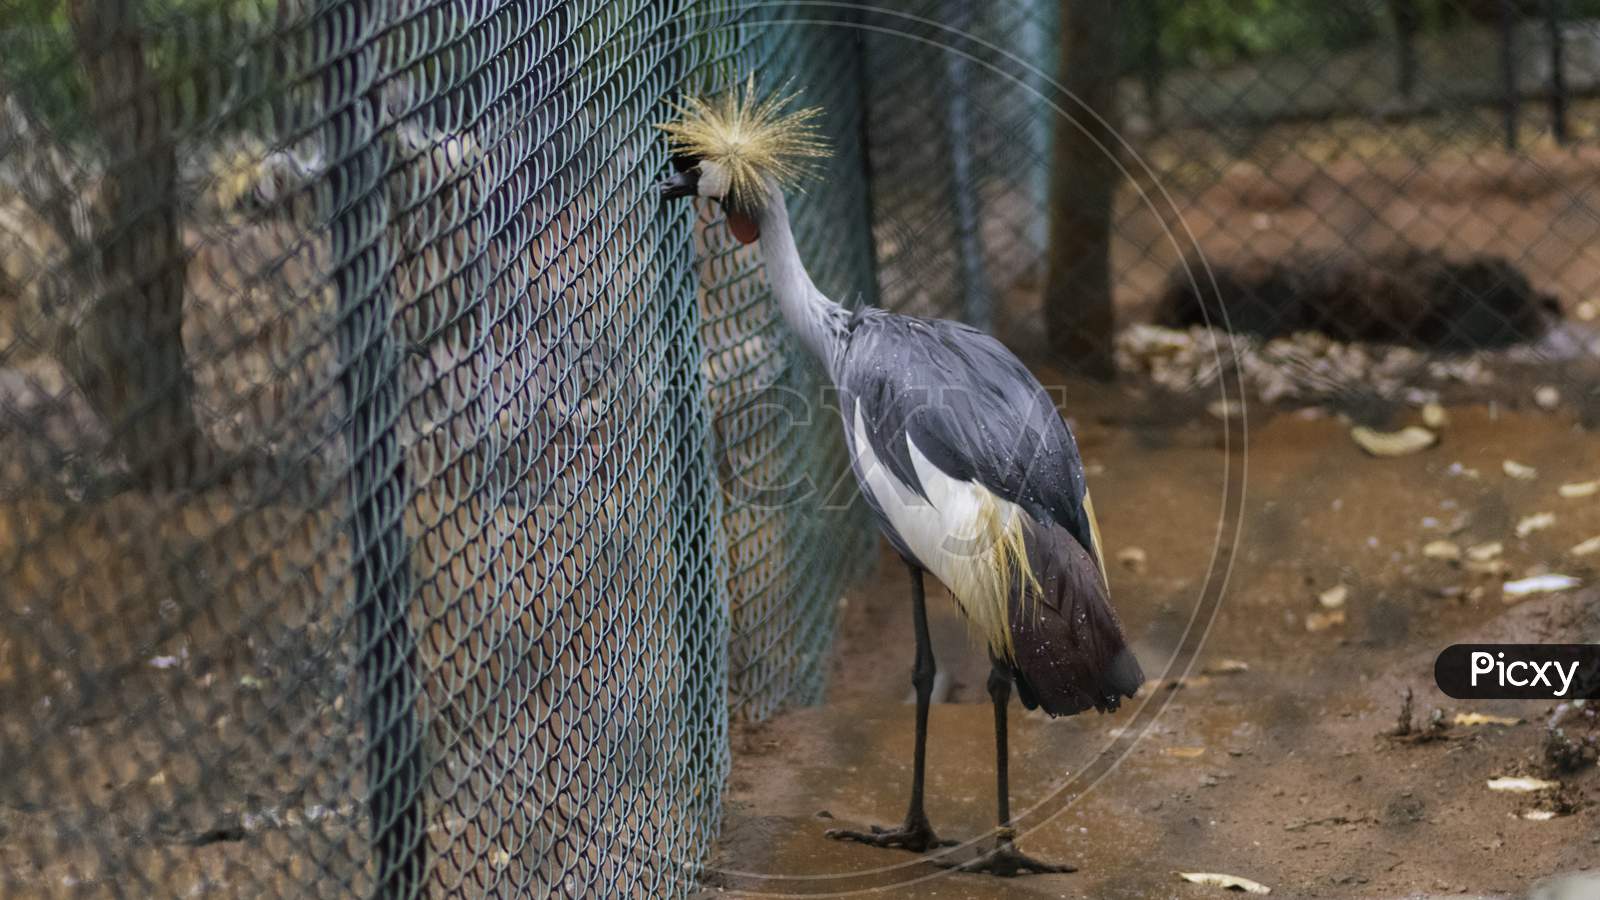 Grey Crowned Crane Close To The Fence Watching Outside In Birds Park, Hambantota